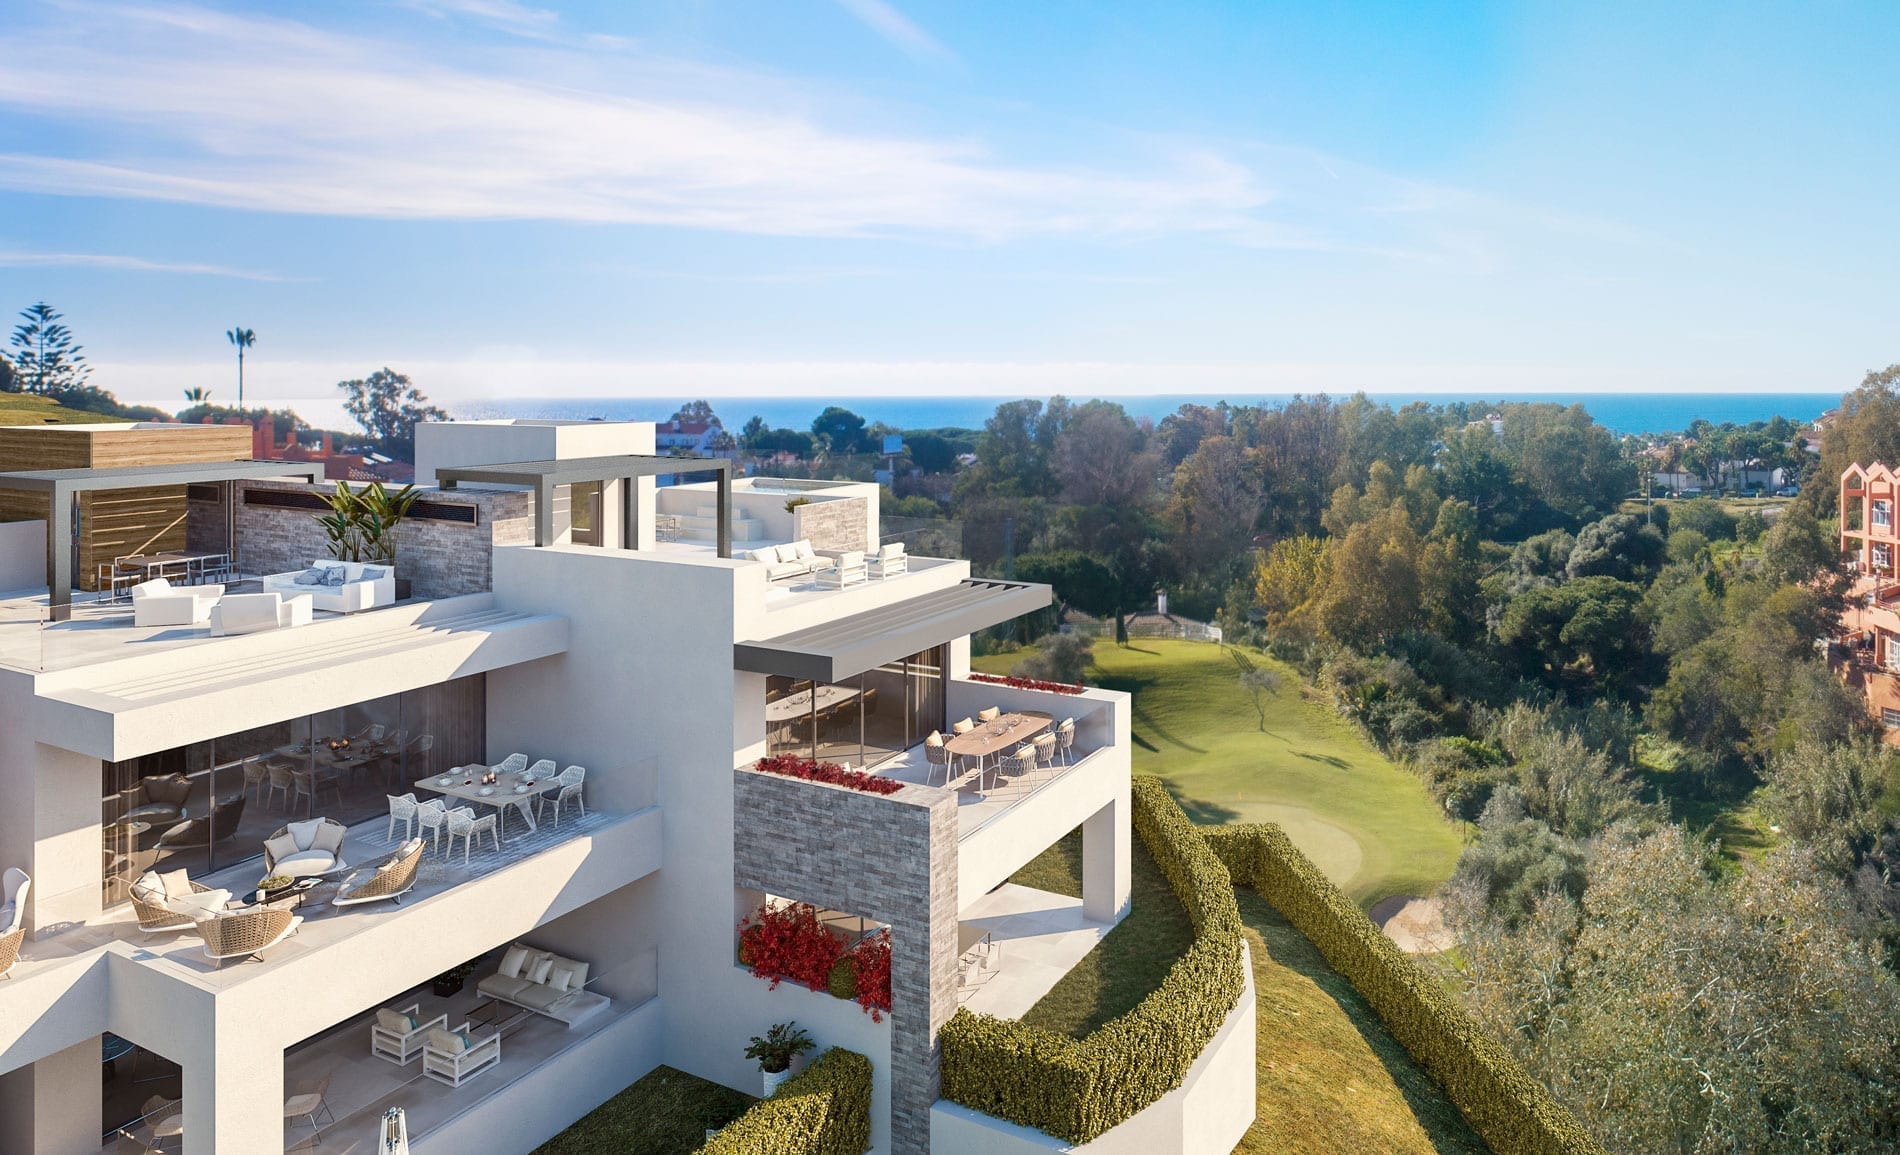 Artola Homes has an idyllic location, on the front line of the Cabopino Golf Course in Marbella